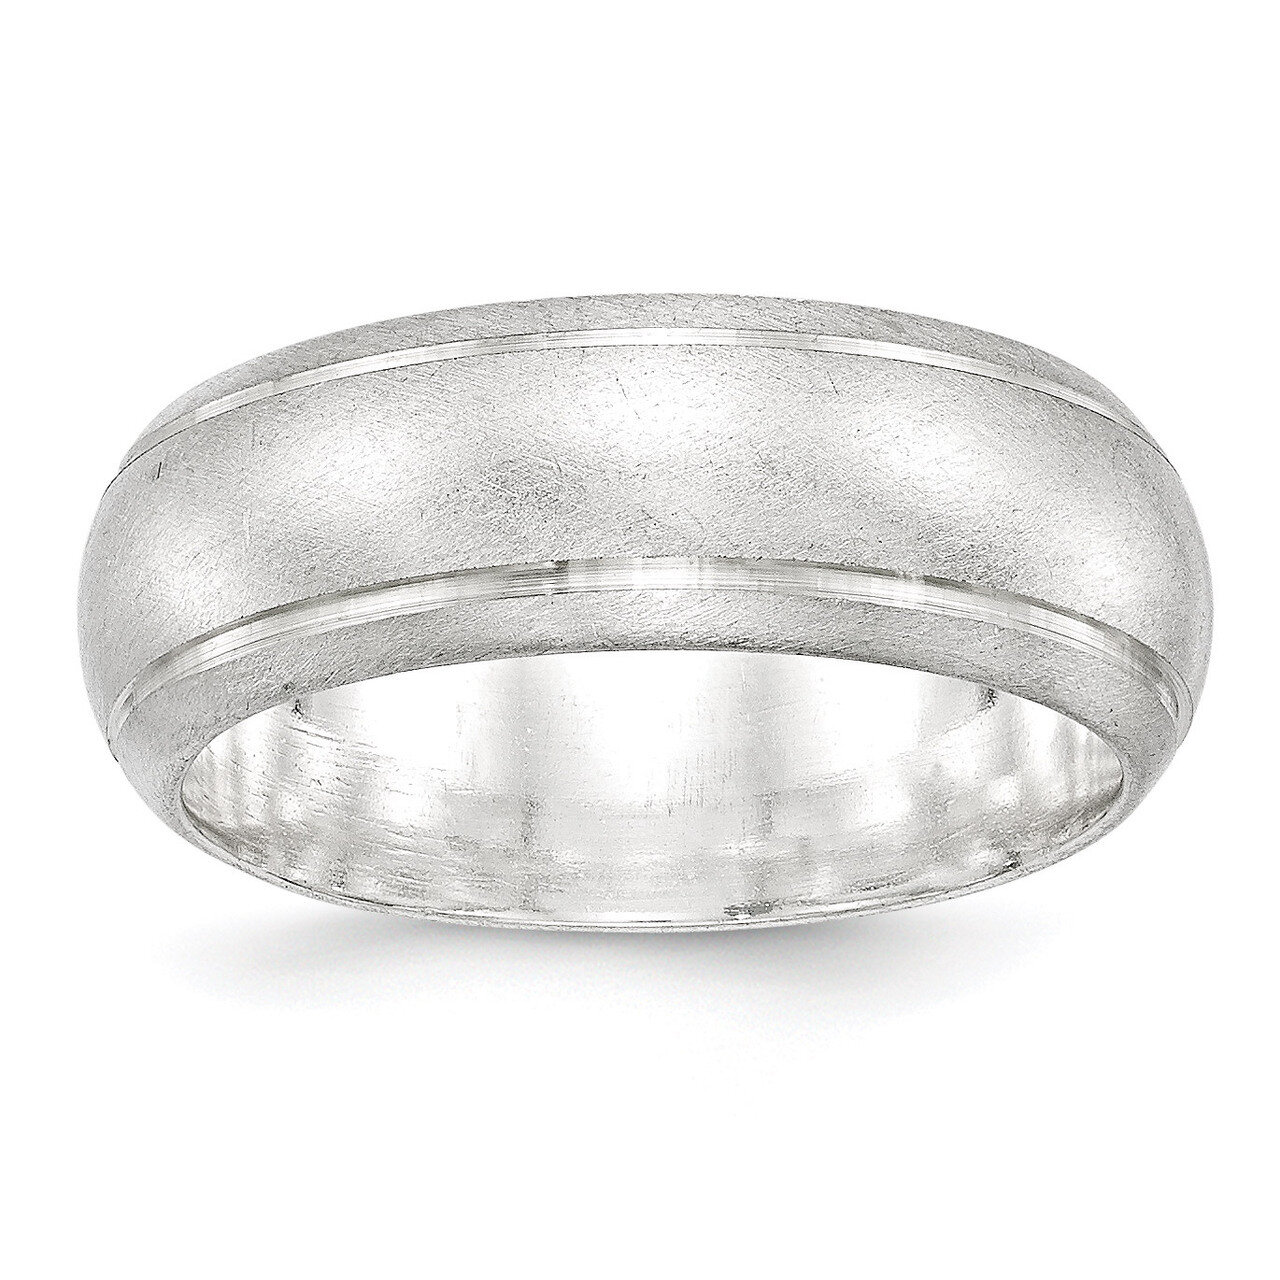 8mm Satin Finish Band - Sterling Silver QSFB080